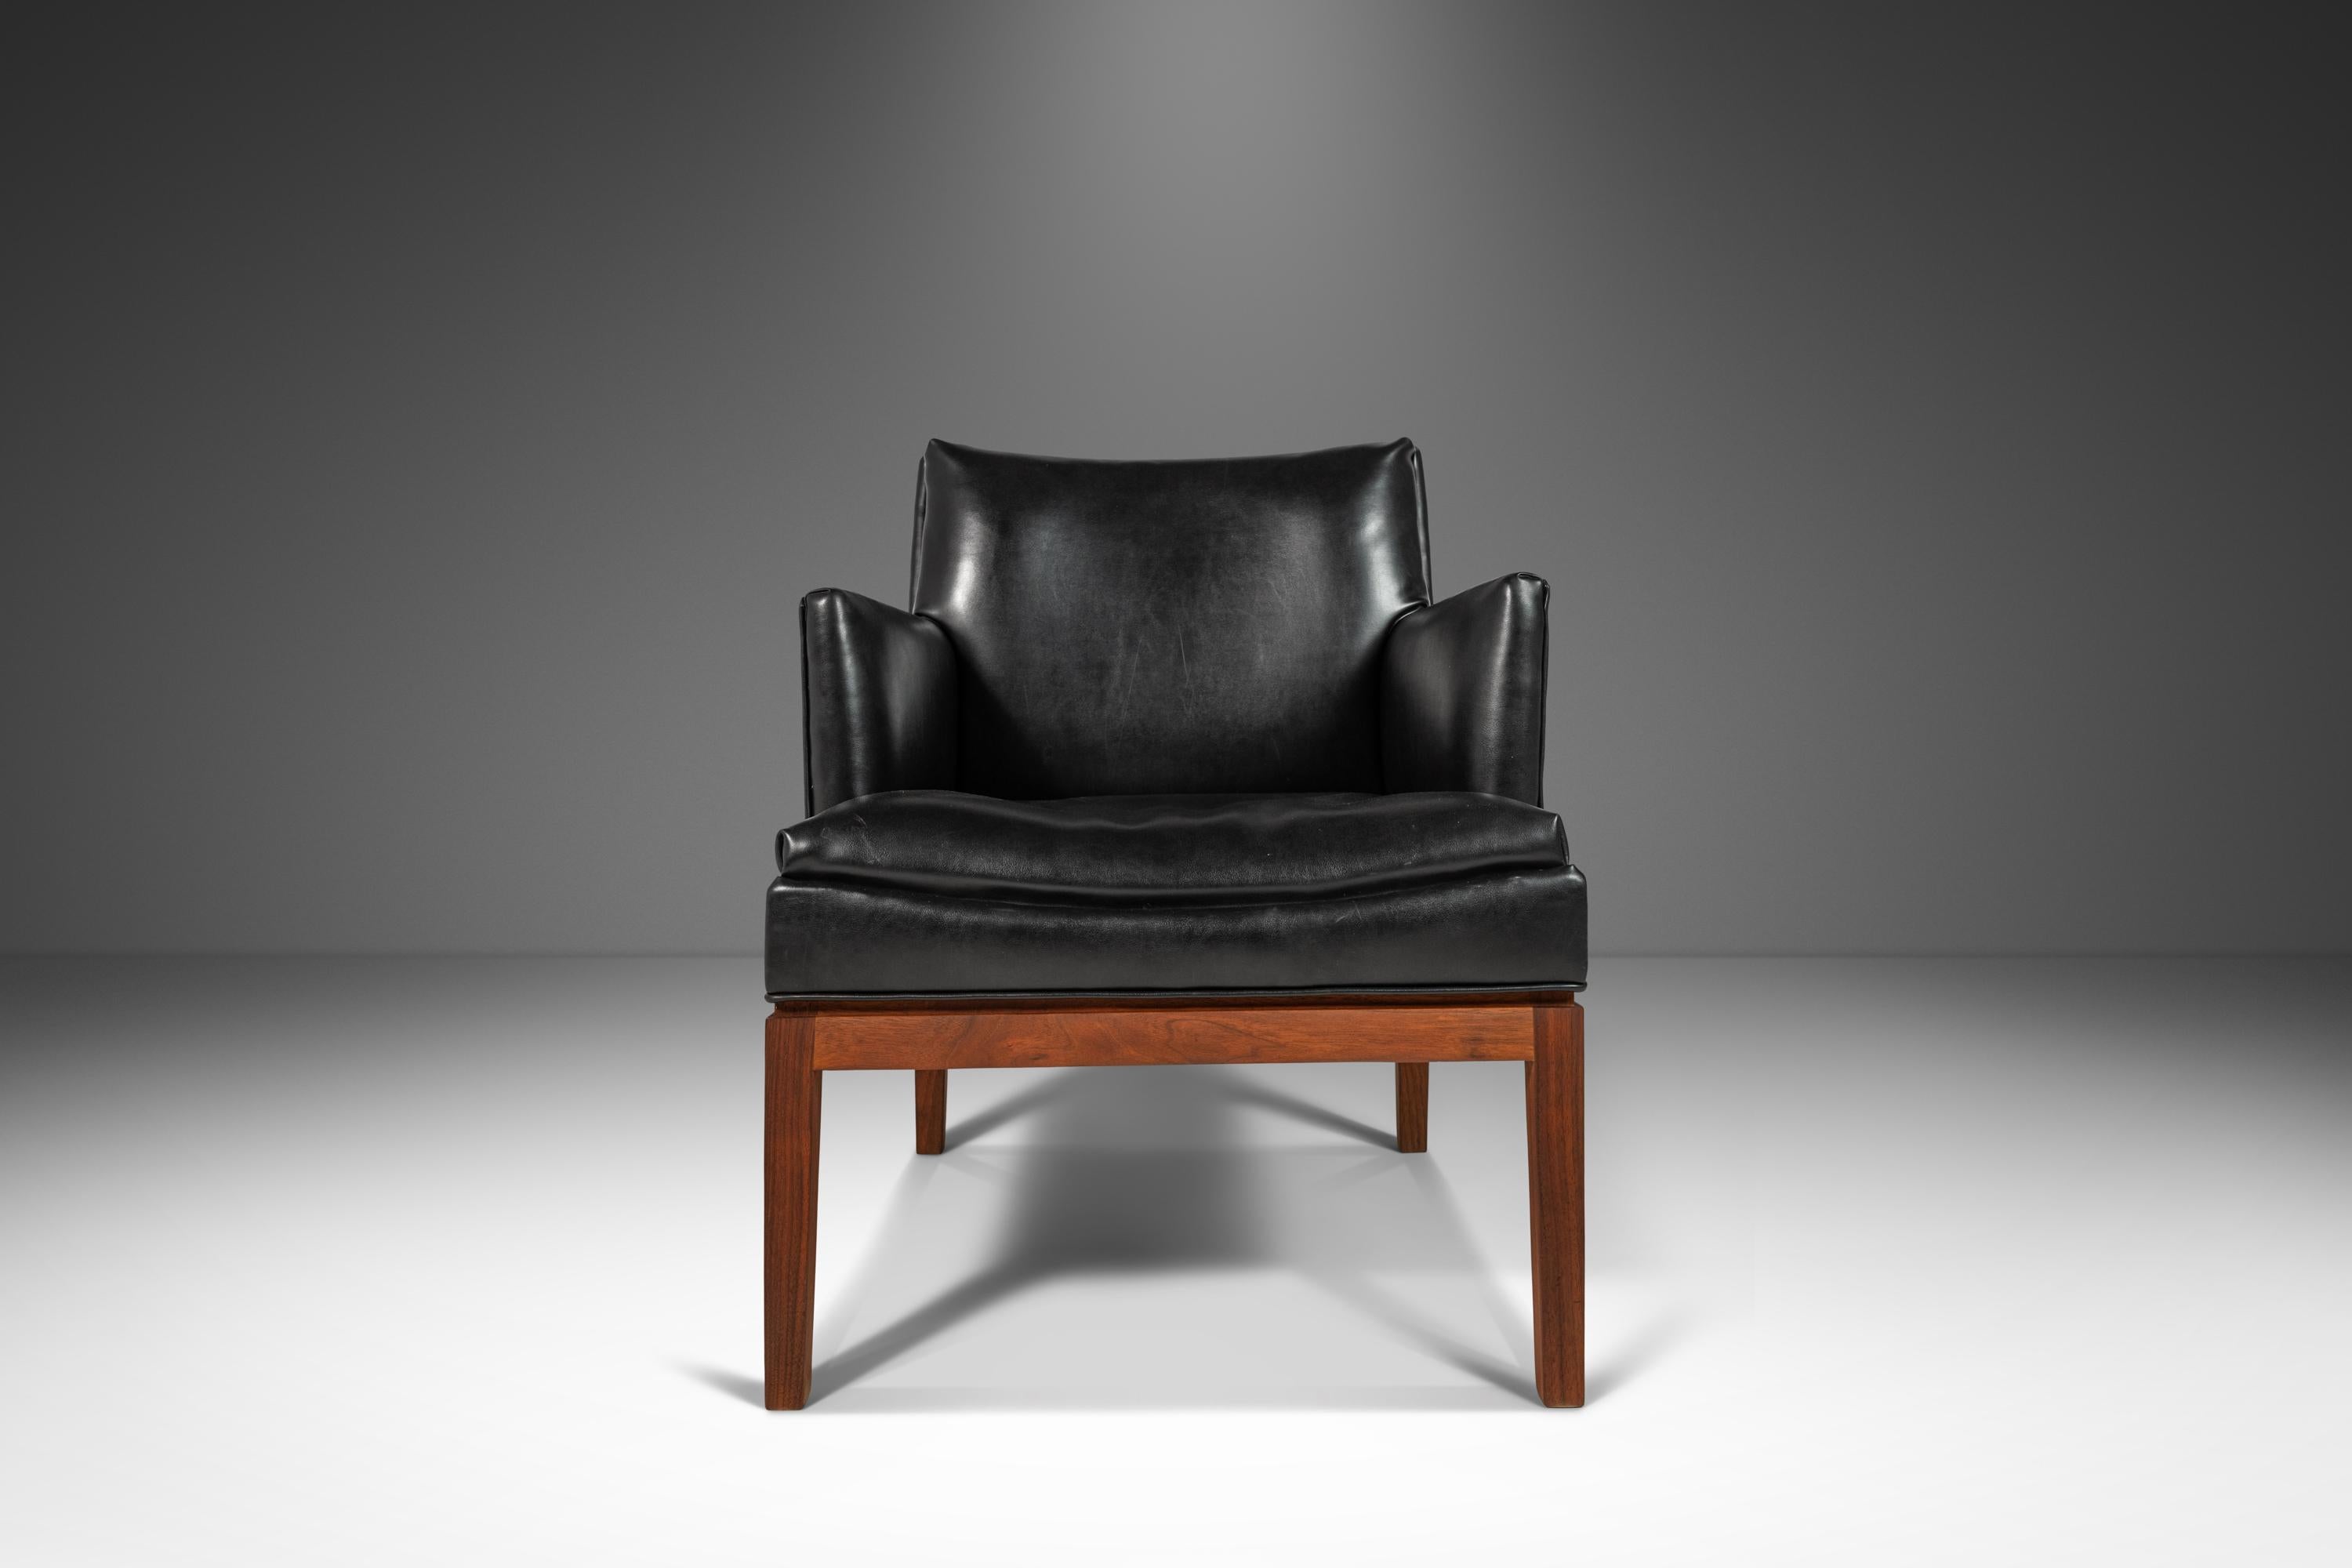 Mid-20th Century Set of 2 Lounge Chairs by Marble Imperial in Leatherette & Walnut, USA, c. 1960s For Sale